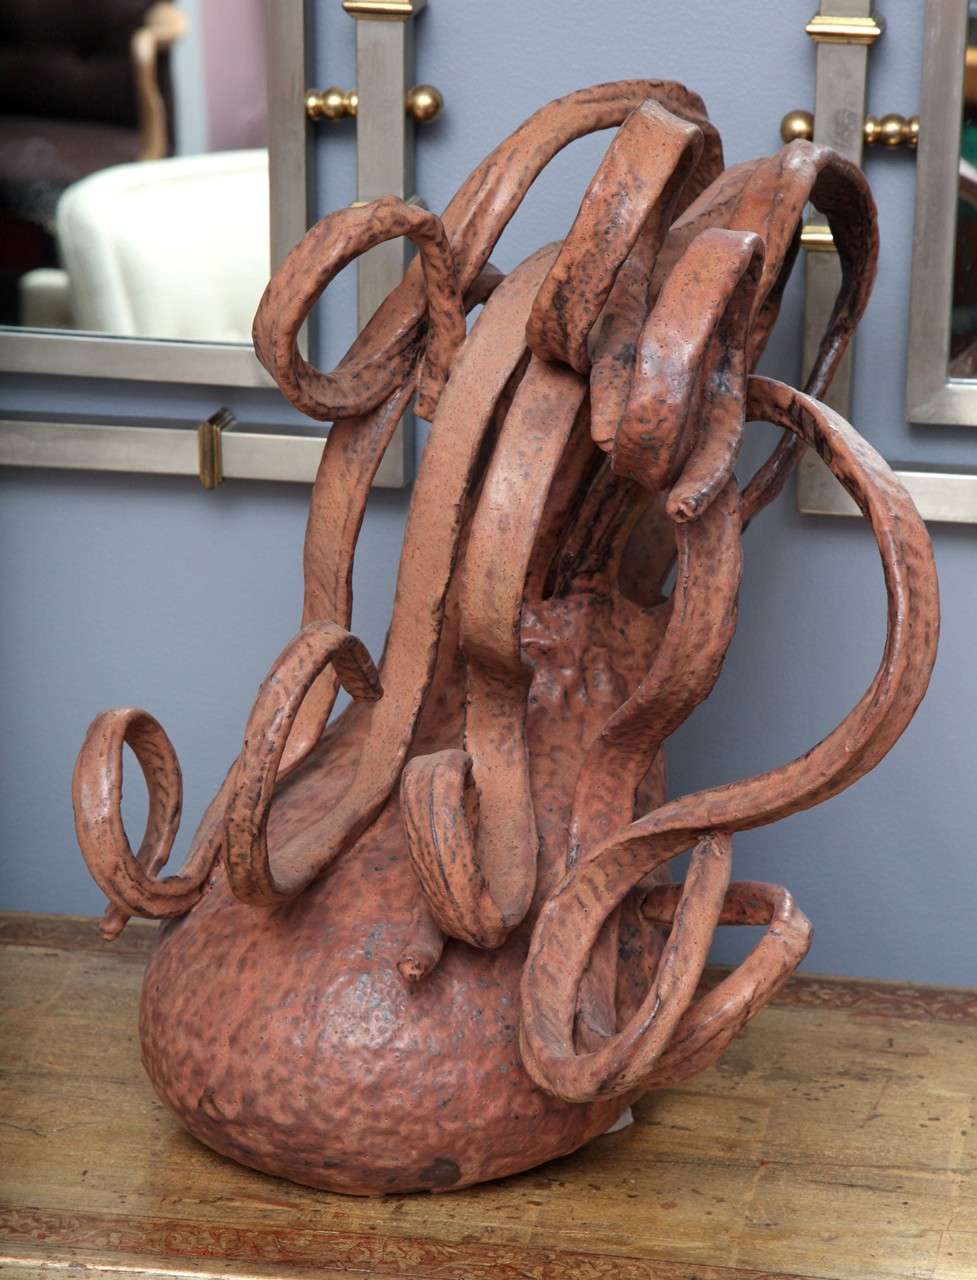 PETER SCHLESINGER (b. 1948)
Hand-built ceramic vessel in the shape of a stylized squid with tentacles. Glazed in a deep rust satin glaze.
Signed and dated: Peter Schlesinger 1993
American, 1993